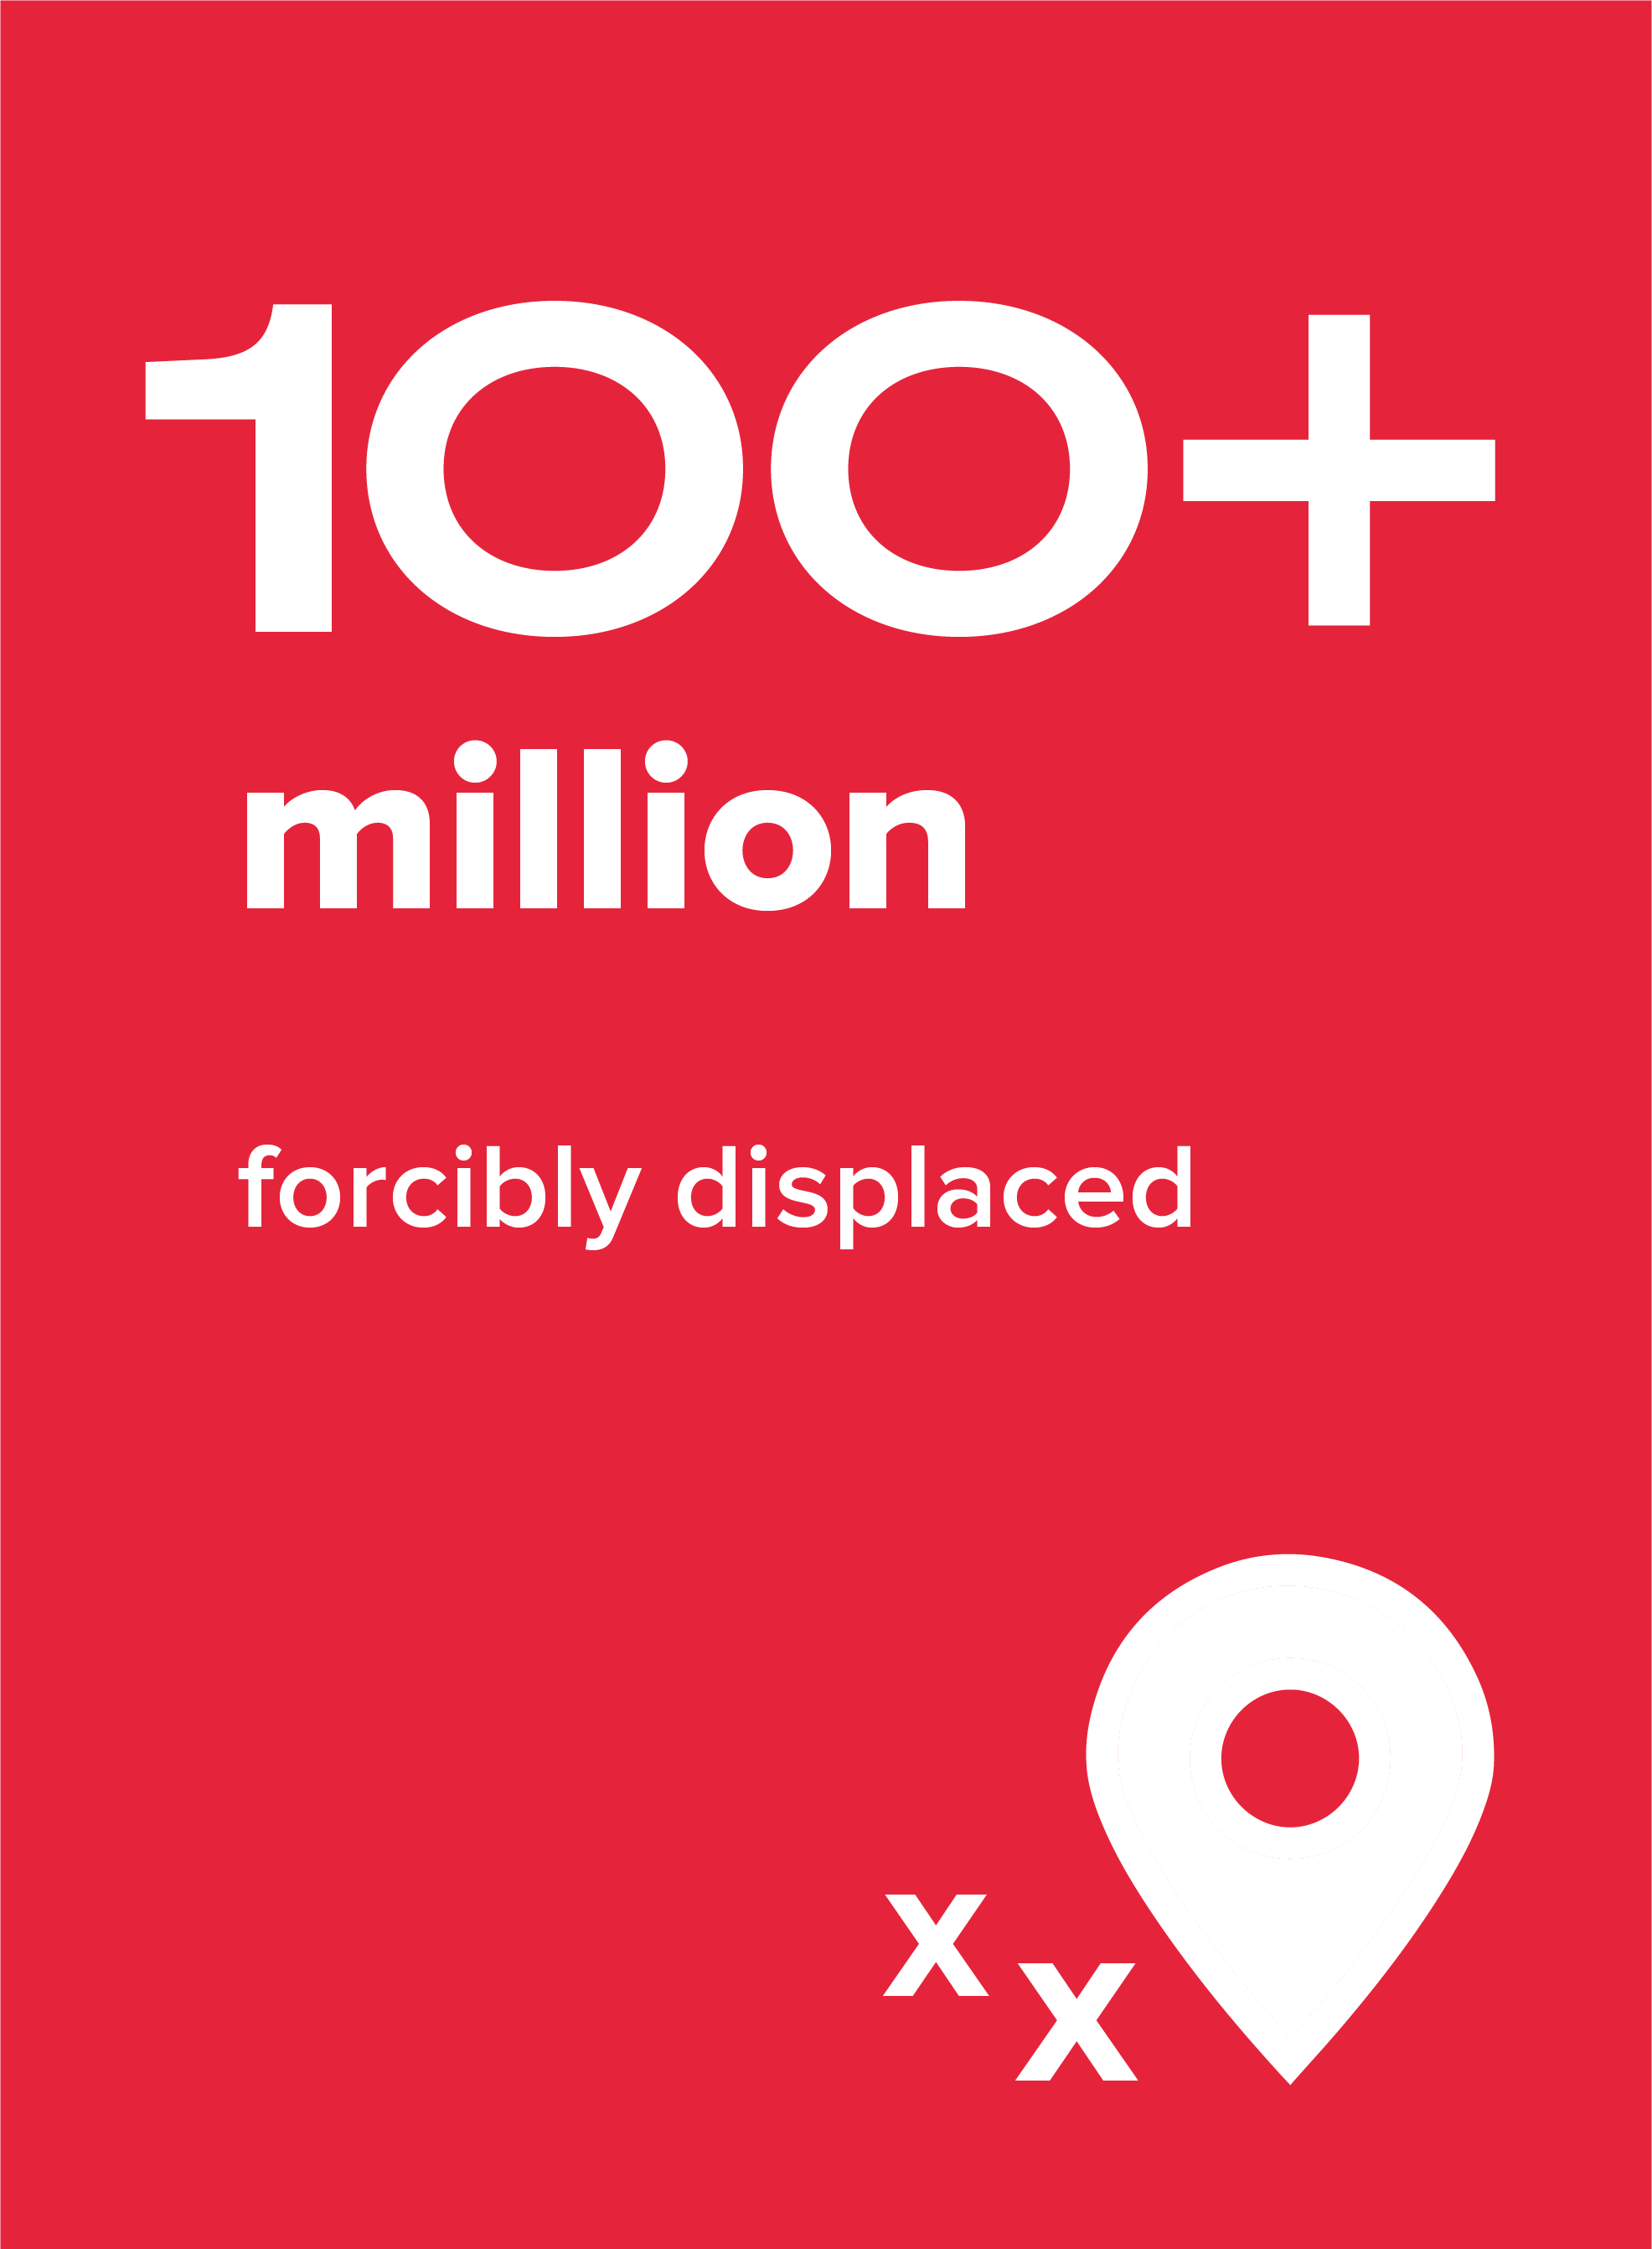 100+ million people are forcibly displaced